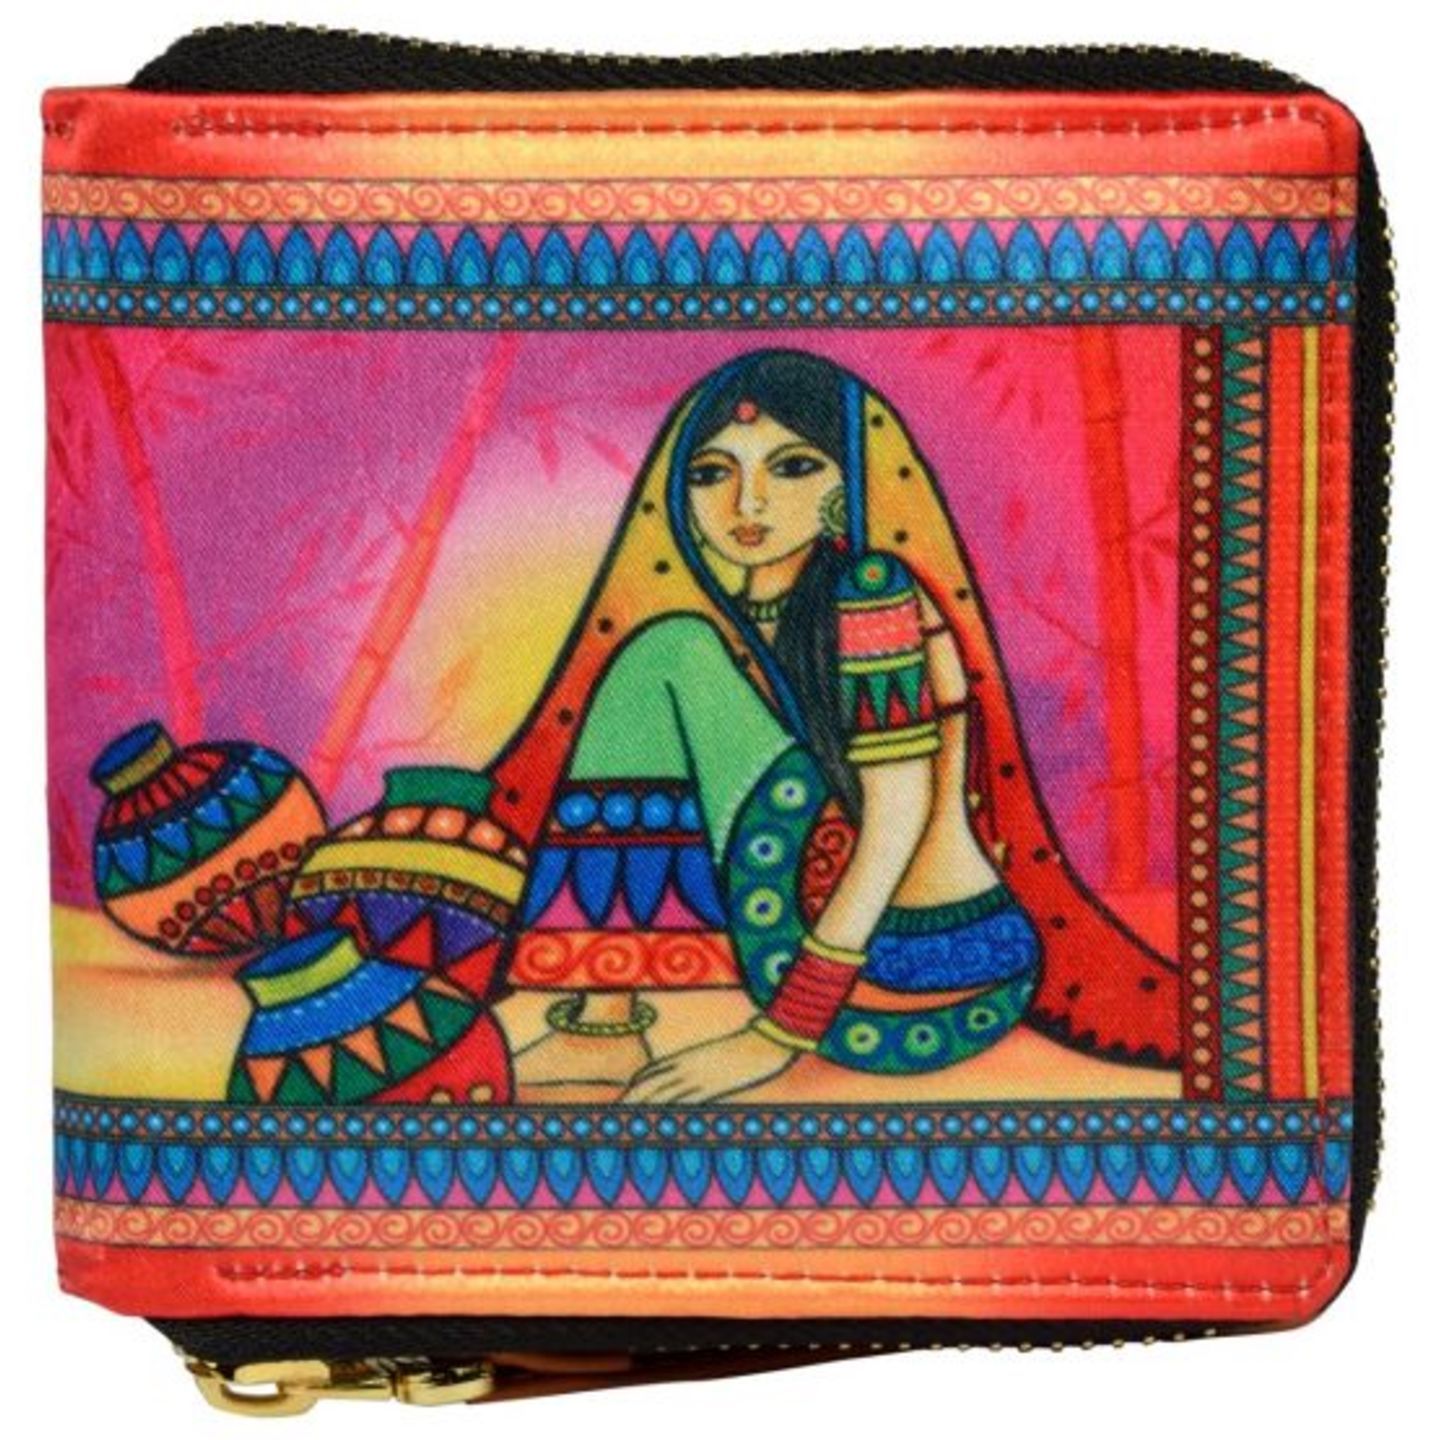 Womens Wallet Multi-Colored, W04-02